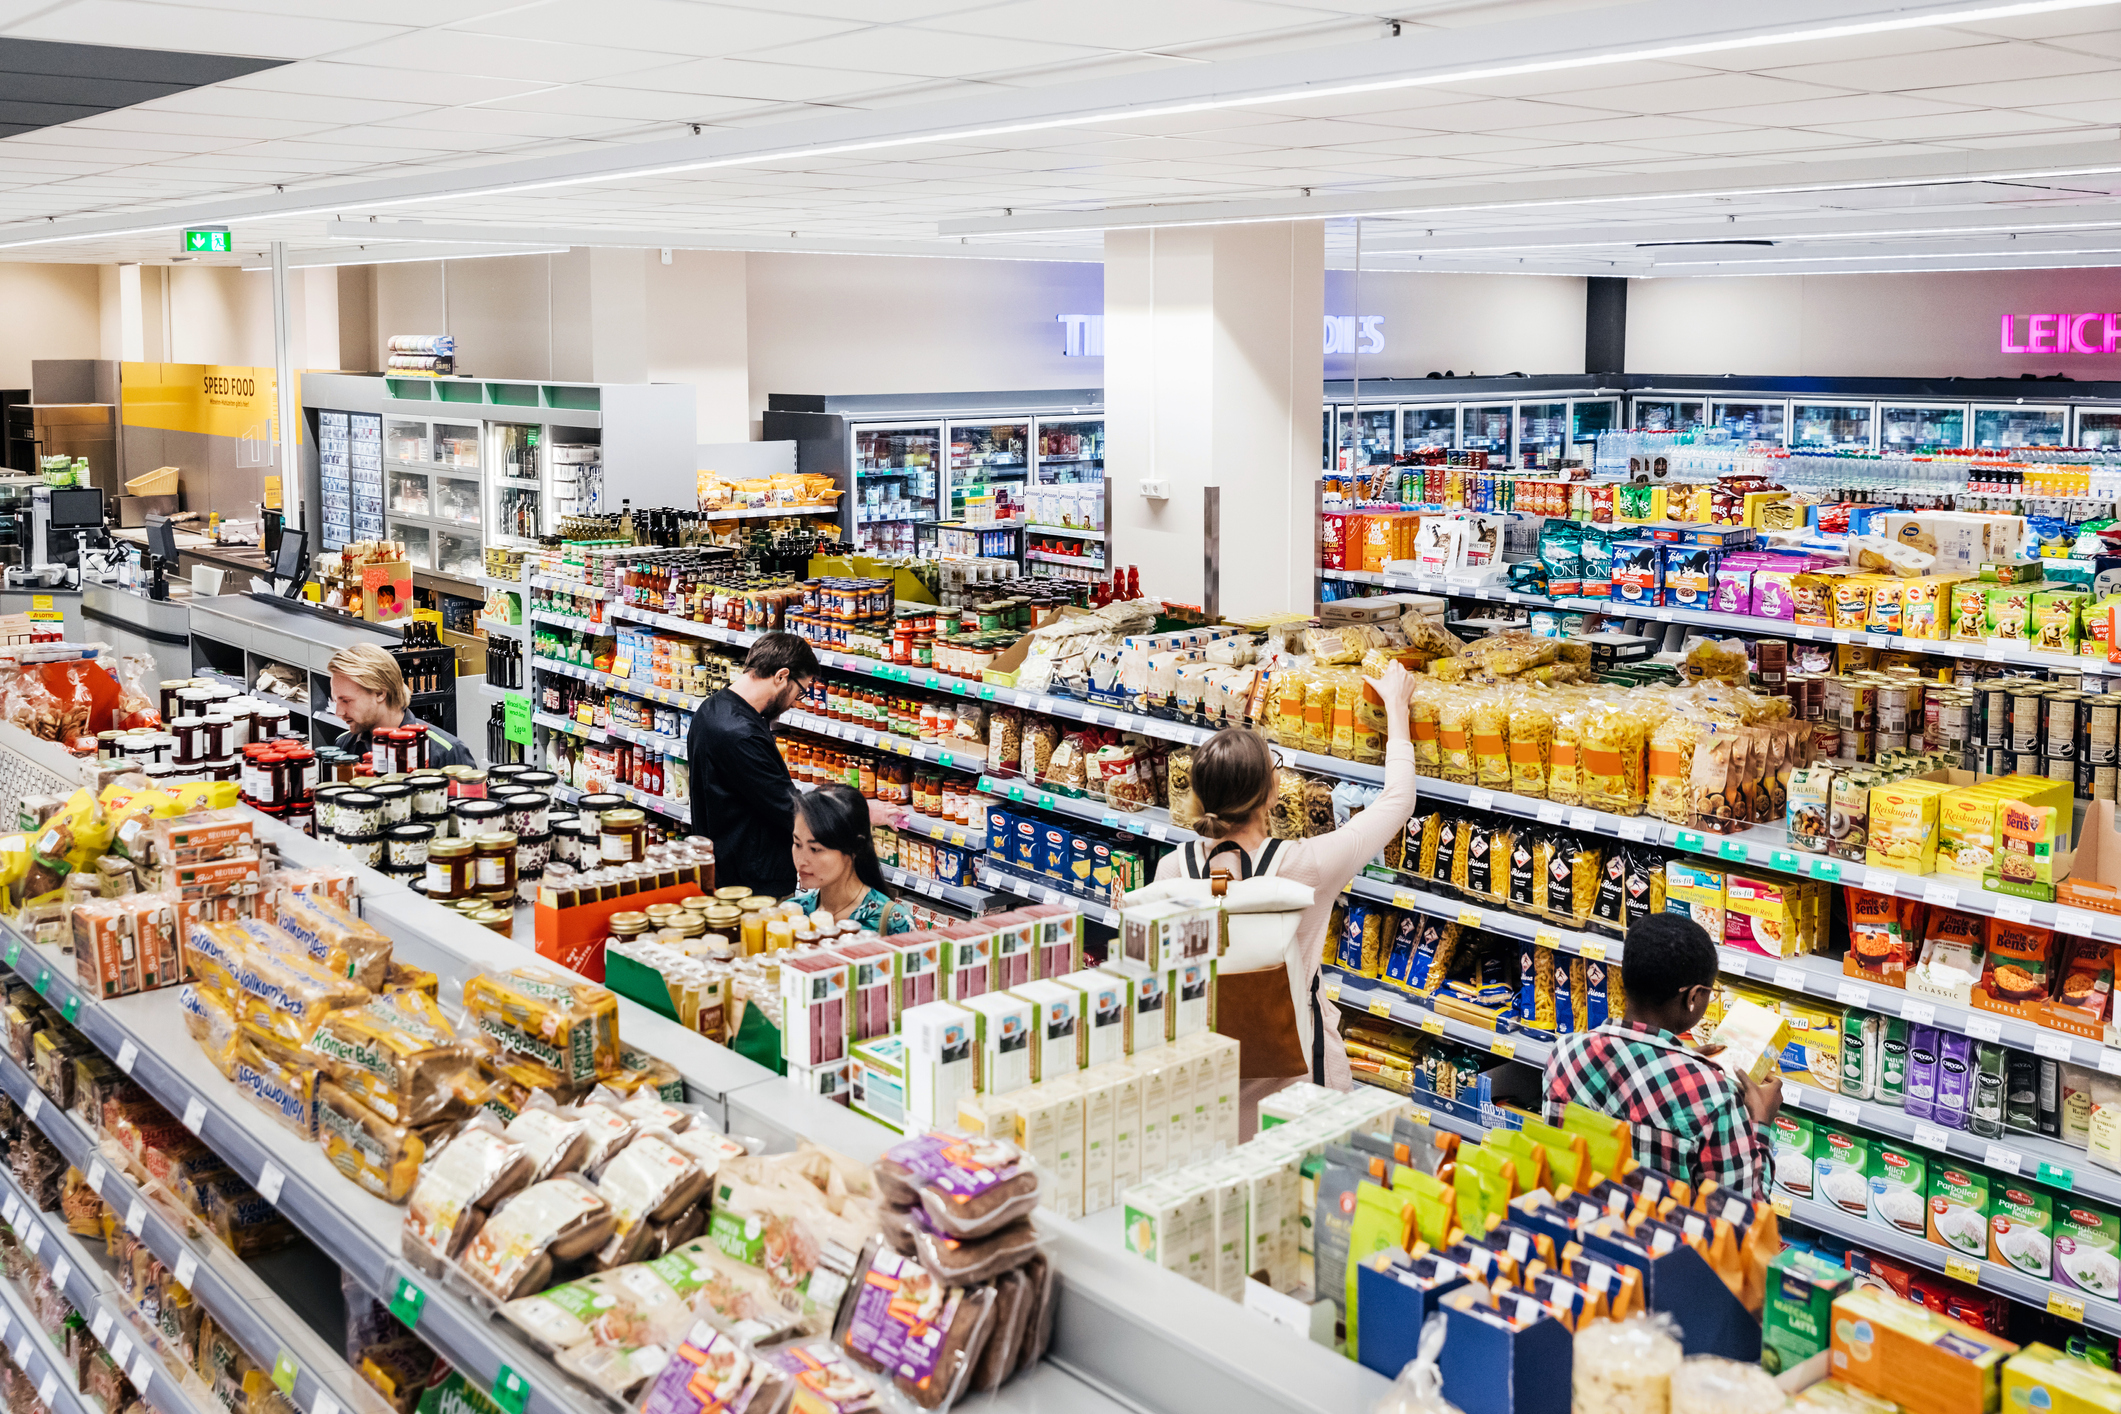 A busy and colorful supermarket with customers shopping for groceries. (Tom Werner—Getty Images&amp;)